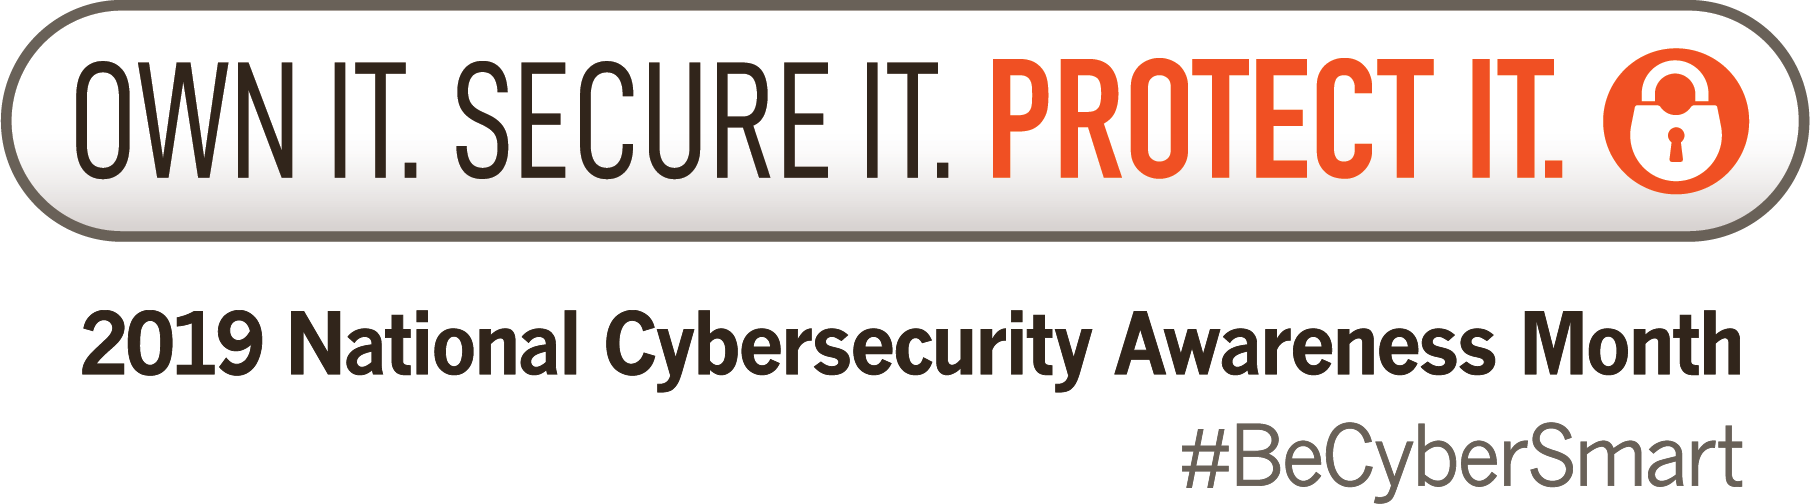 Icon for 2019 National Cybersecurity Awareness Month stating: Own IT. Secure IT. Protect IT.